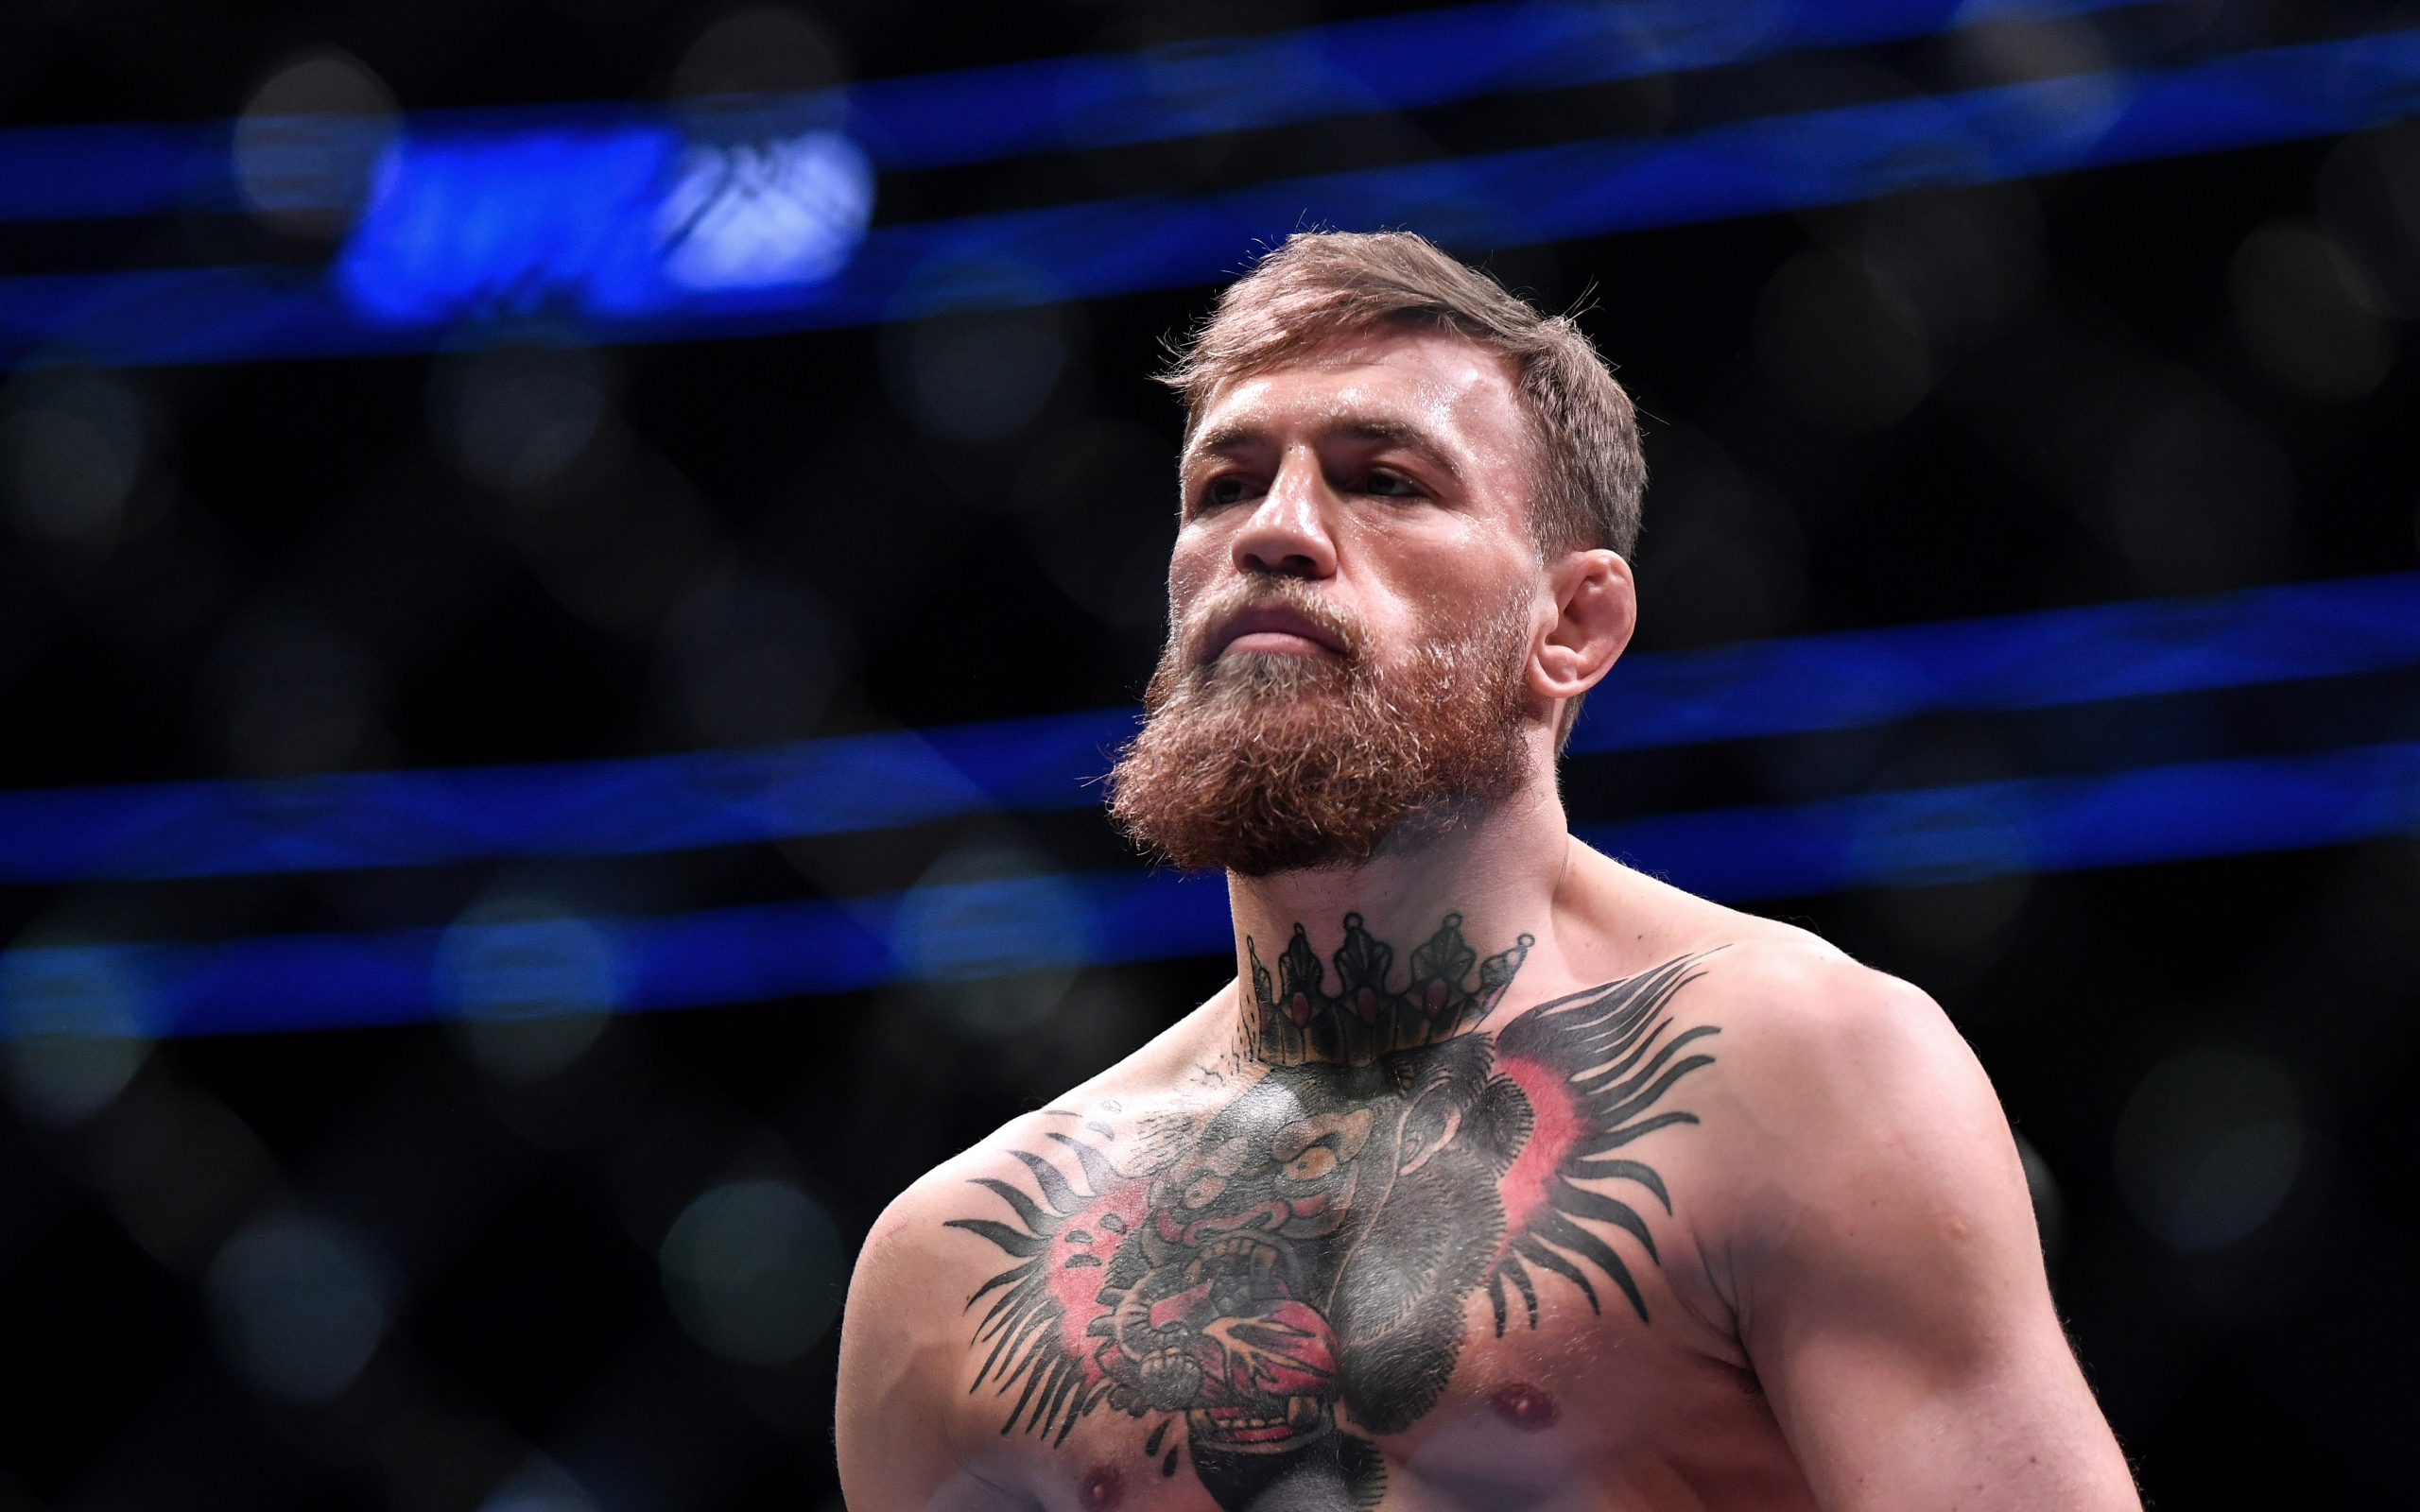 Irish fighter Conor McGregor with body tattoos in the ring